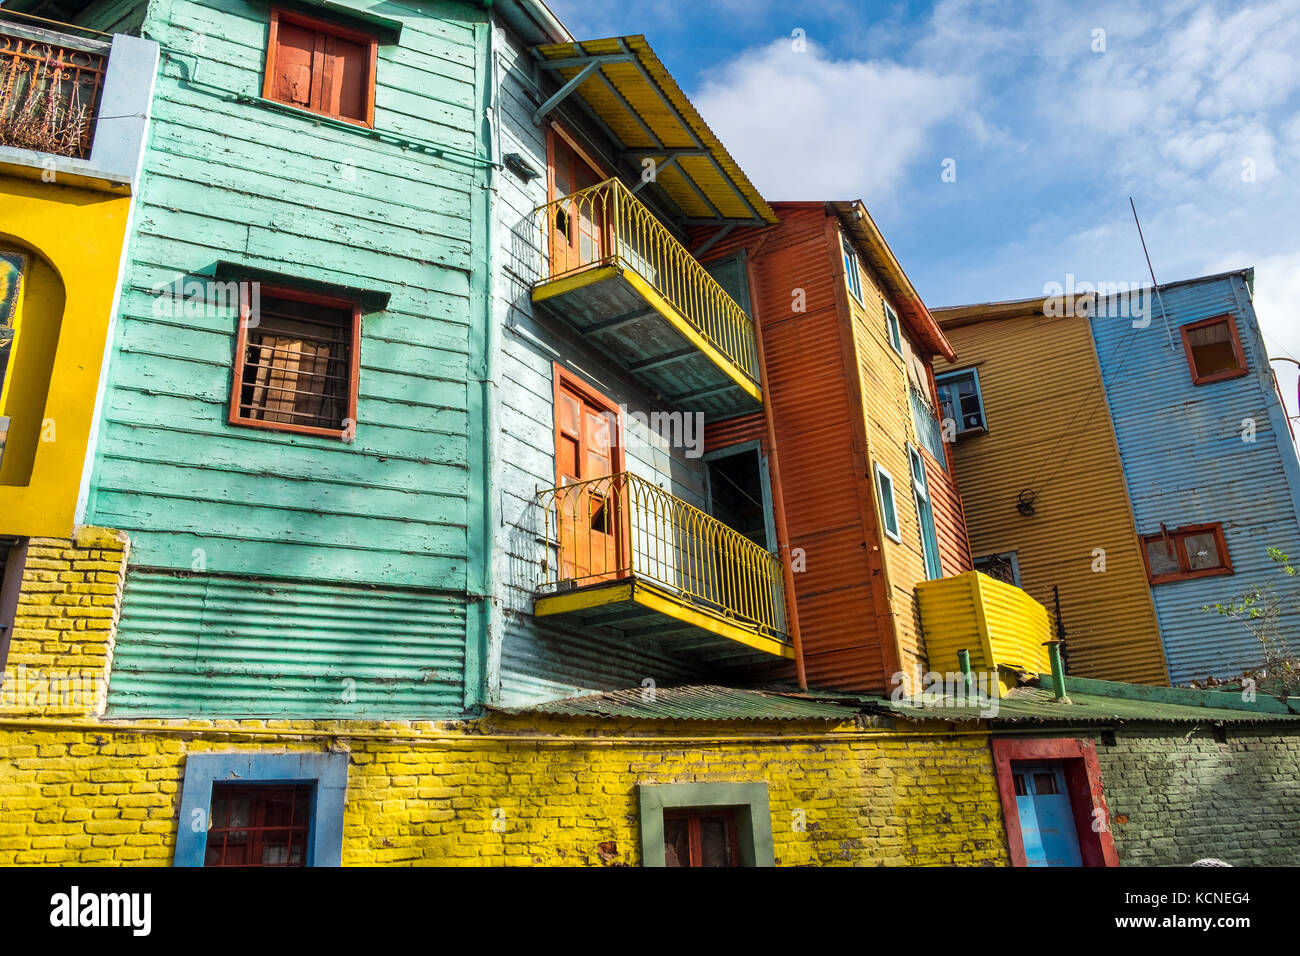 The colorful houses of Caminito Street in La Boca, Buenos Aires Stock Photo